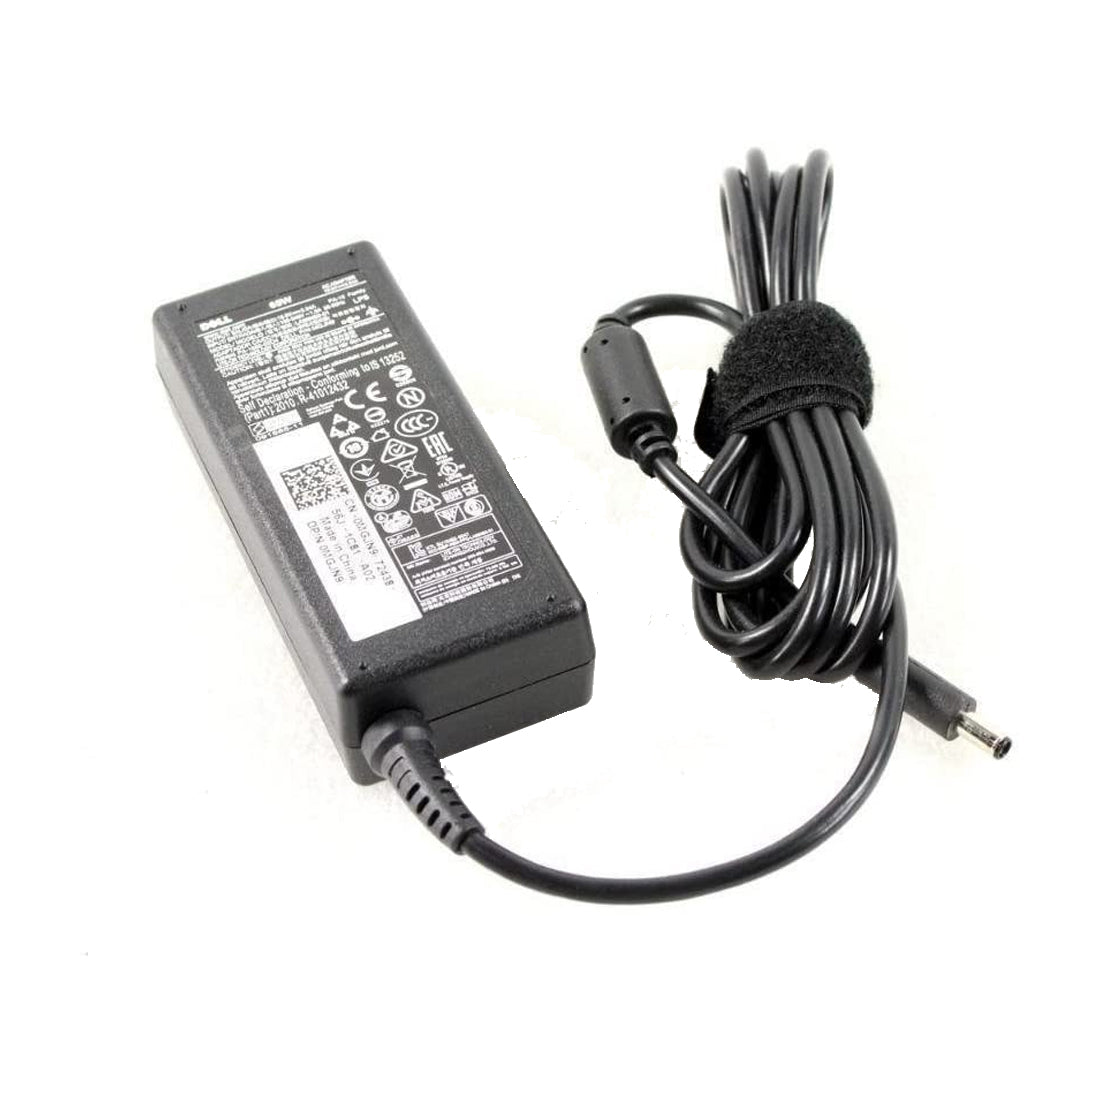 Dell Original 65W 19.5V 4.5mm Pin Laptop Charger Adapter for Inspiron 15 5575 With Power Cord